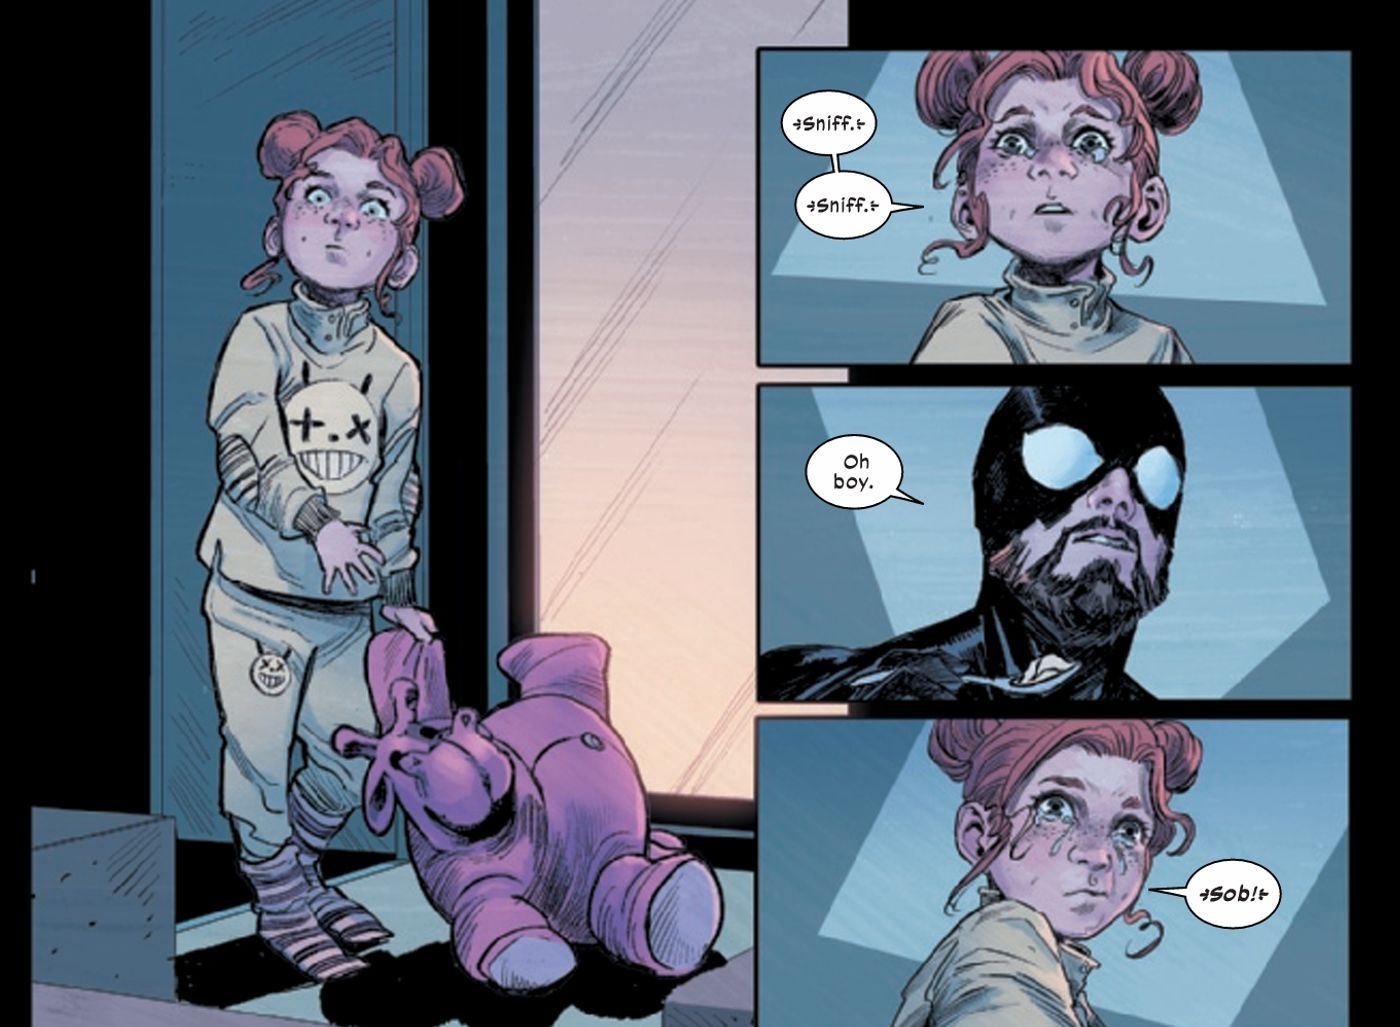 May Parker learning that her father, Peter Parker, is actually Spider-Man.